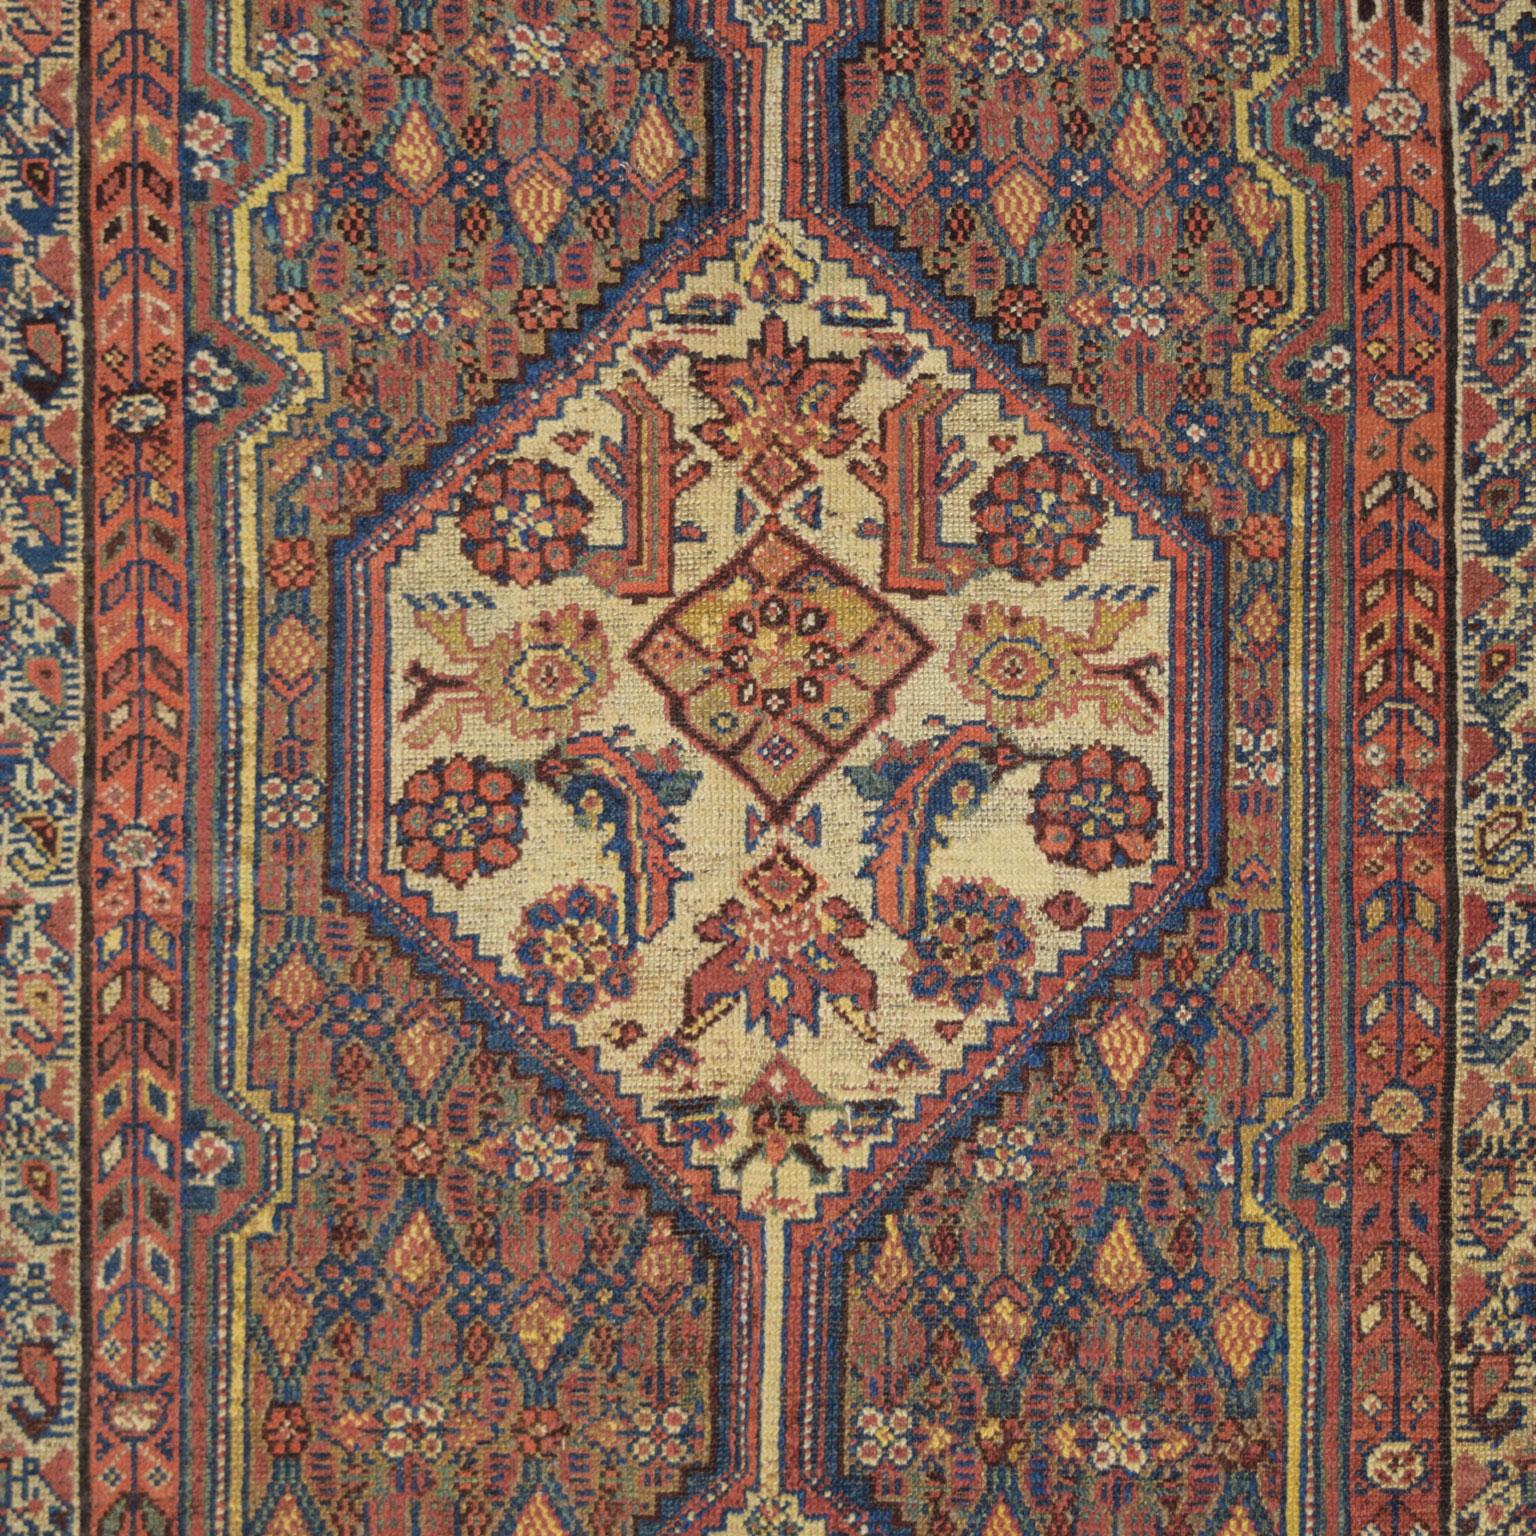 Crafted over 100 years ago in Iran, this antique Persian Saraband carpet is hand-knotted and measures 4’5” x 6’11”. This piece introduces patterns and tones strongly associated with Saraband carpets yet is woven using a Hamadan weave. The blue,